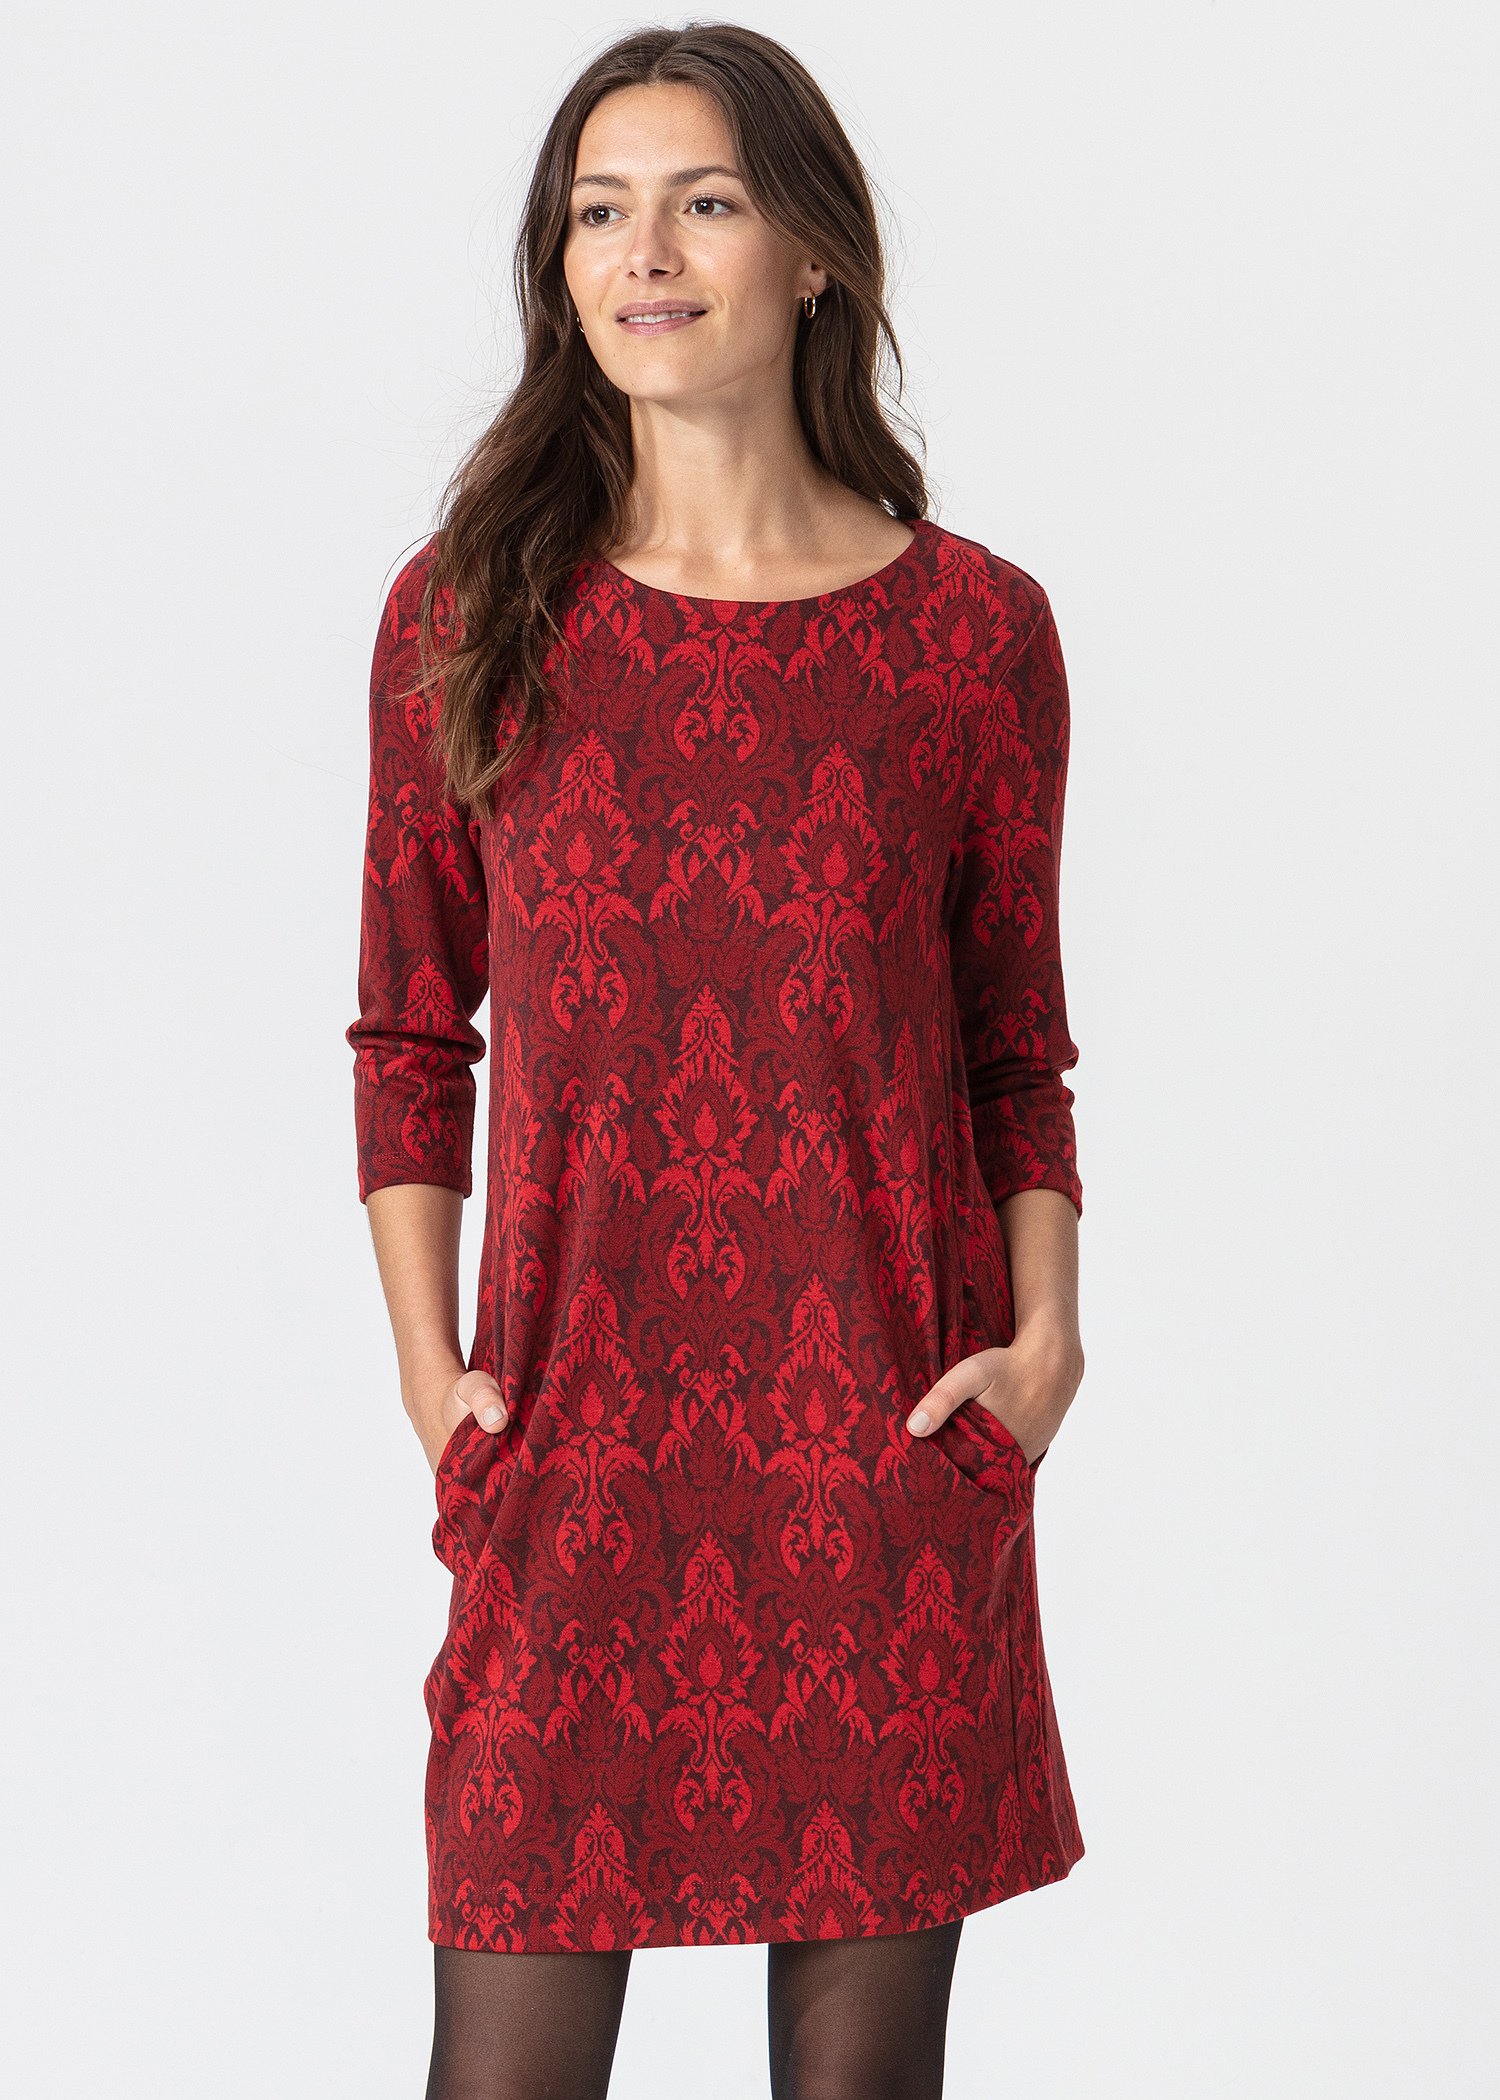 Patterned tunic with pockets